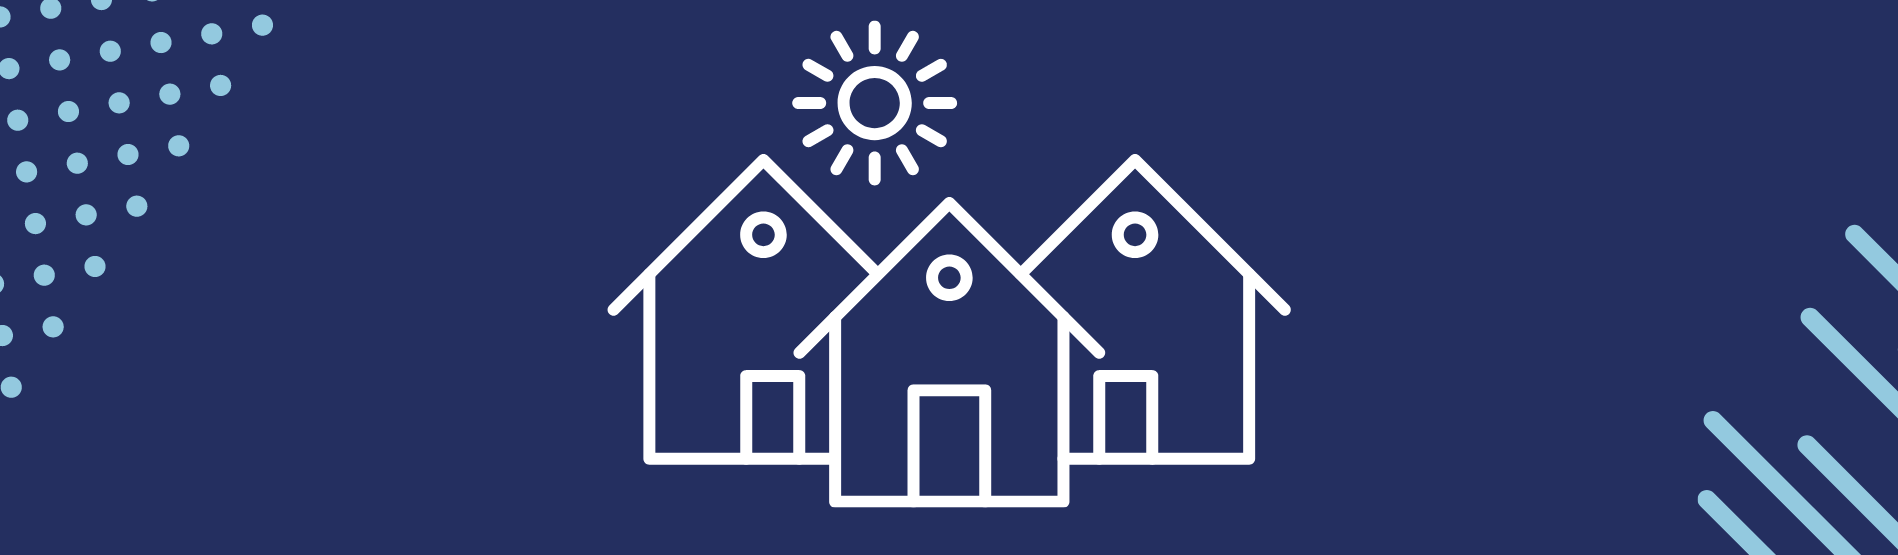 Image shows an icon of some houses in the sunshine